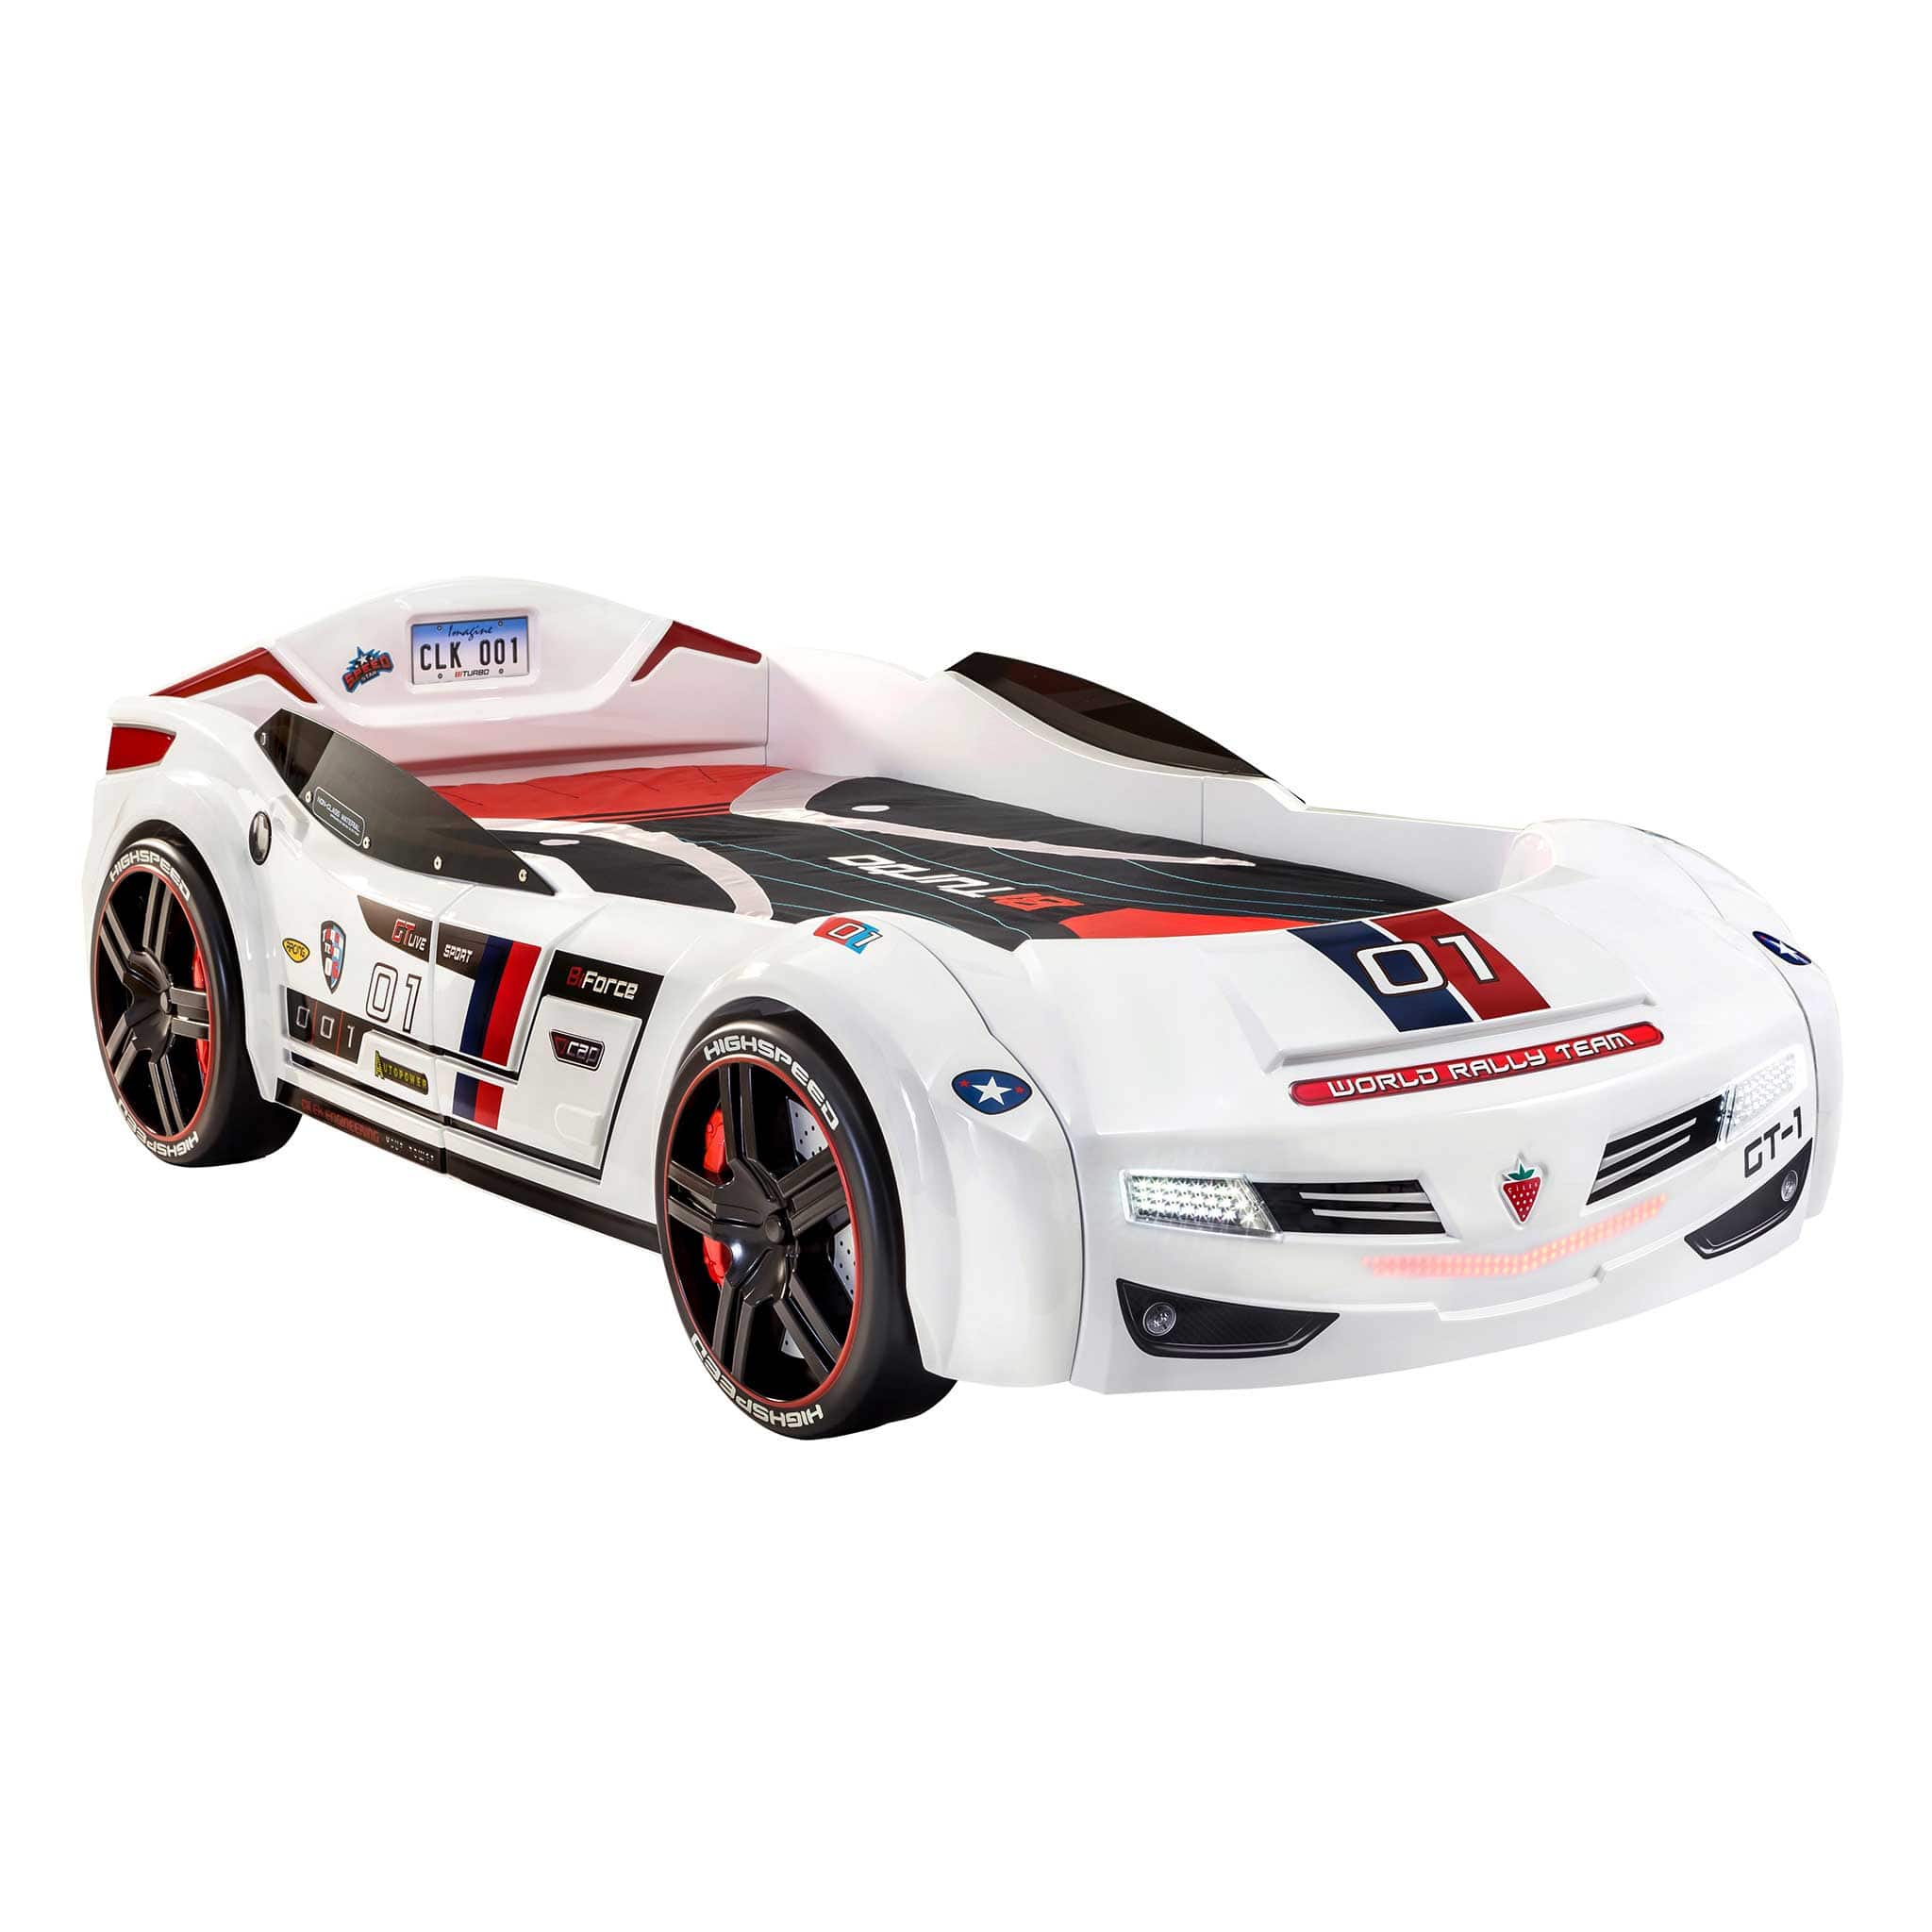 BiTurbo Twin Race Car Bed, Remote Control, LED Lights, Engine Sound, License Plate